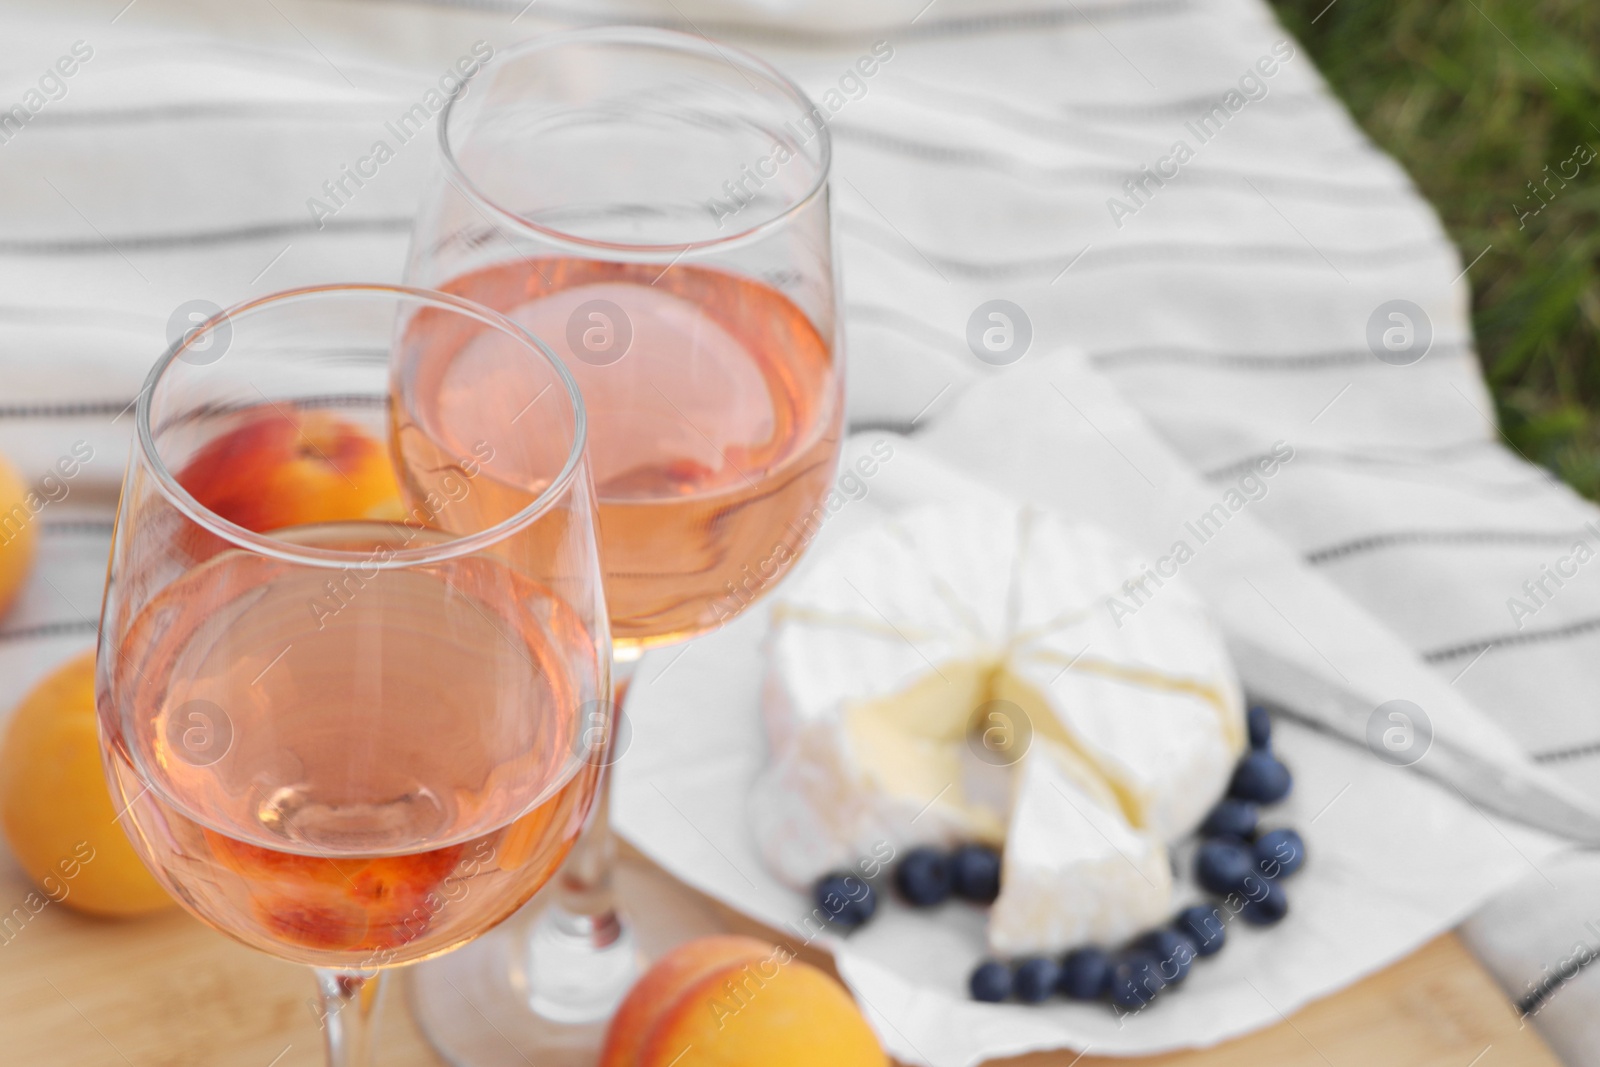 Photo of Glasses of delicious rose wine and food on picnic blanket outdoors, closeup